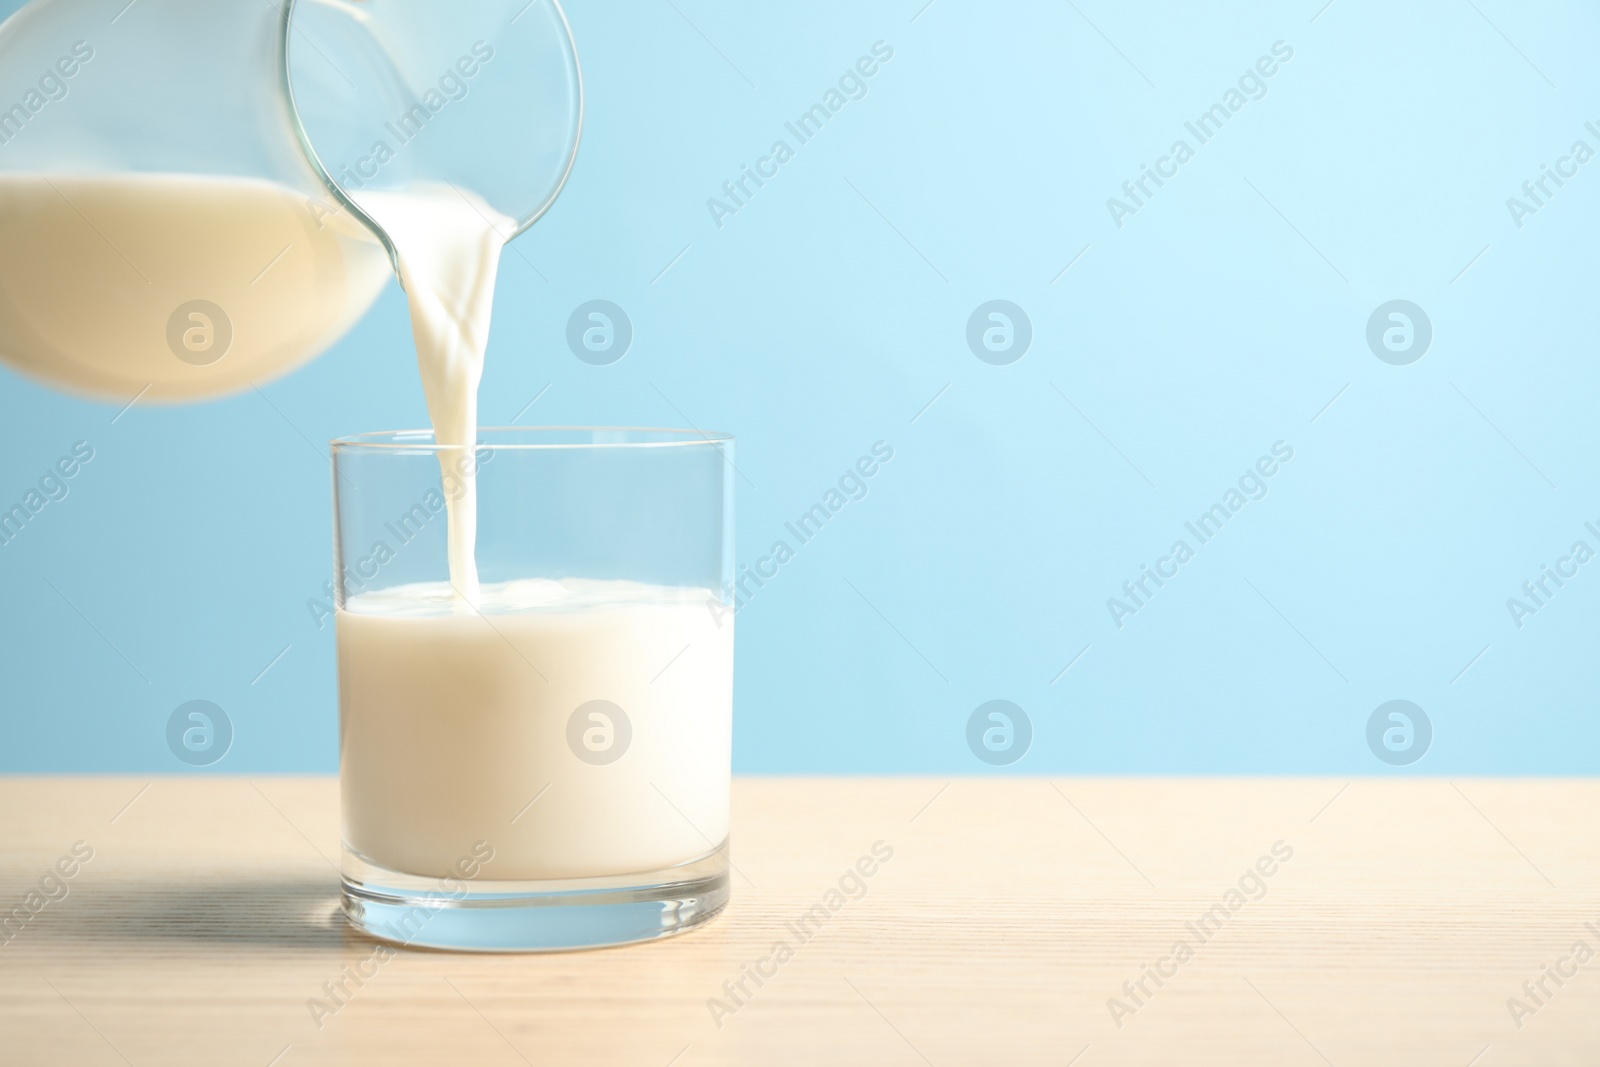 Photo of Pouring milk into glass on wooden table against light blue background. Space for text